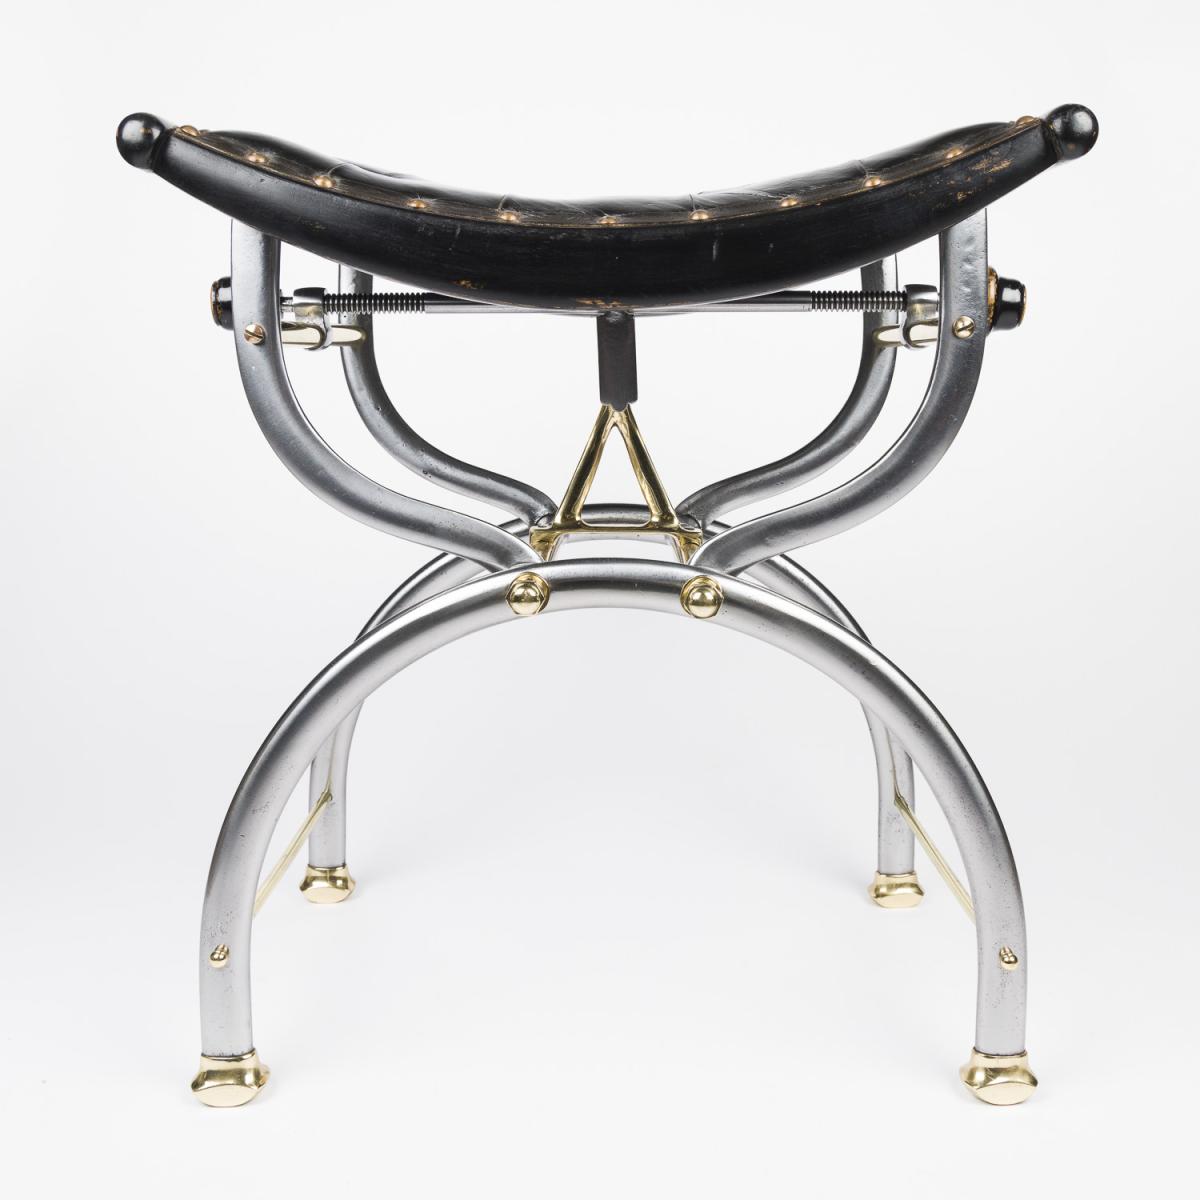 Stool by C. H. Hare & Sons of Birmingham